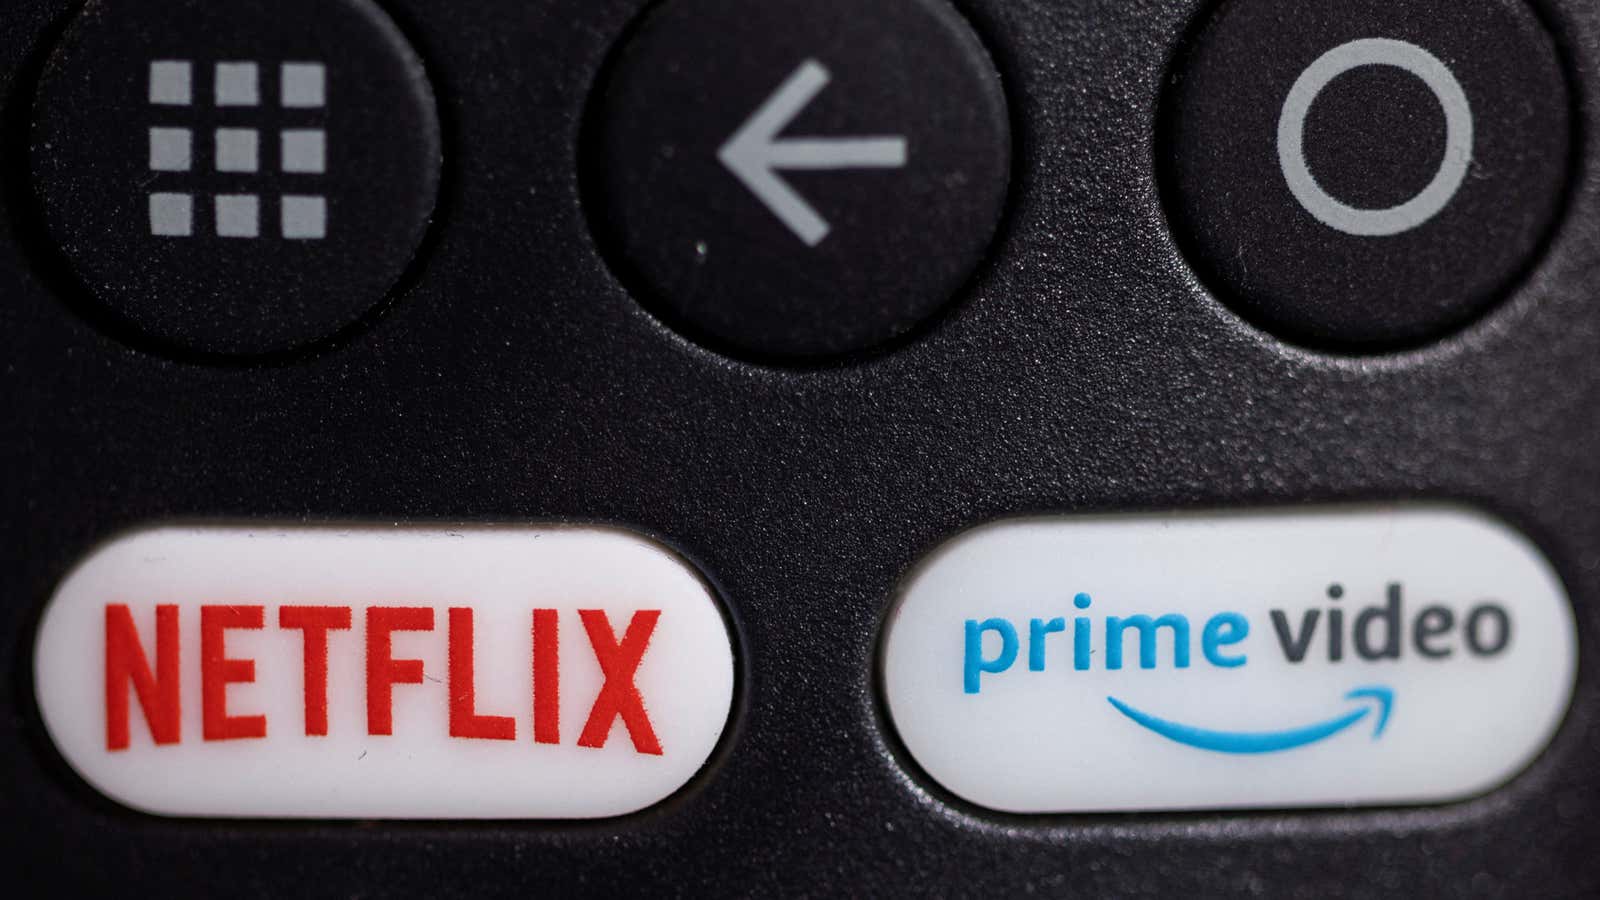 The logos for Netflix and Amazon Prime Video shown on a remote control.